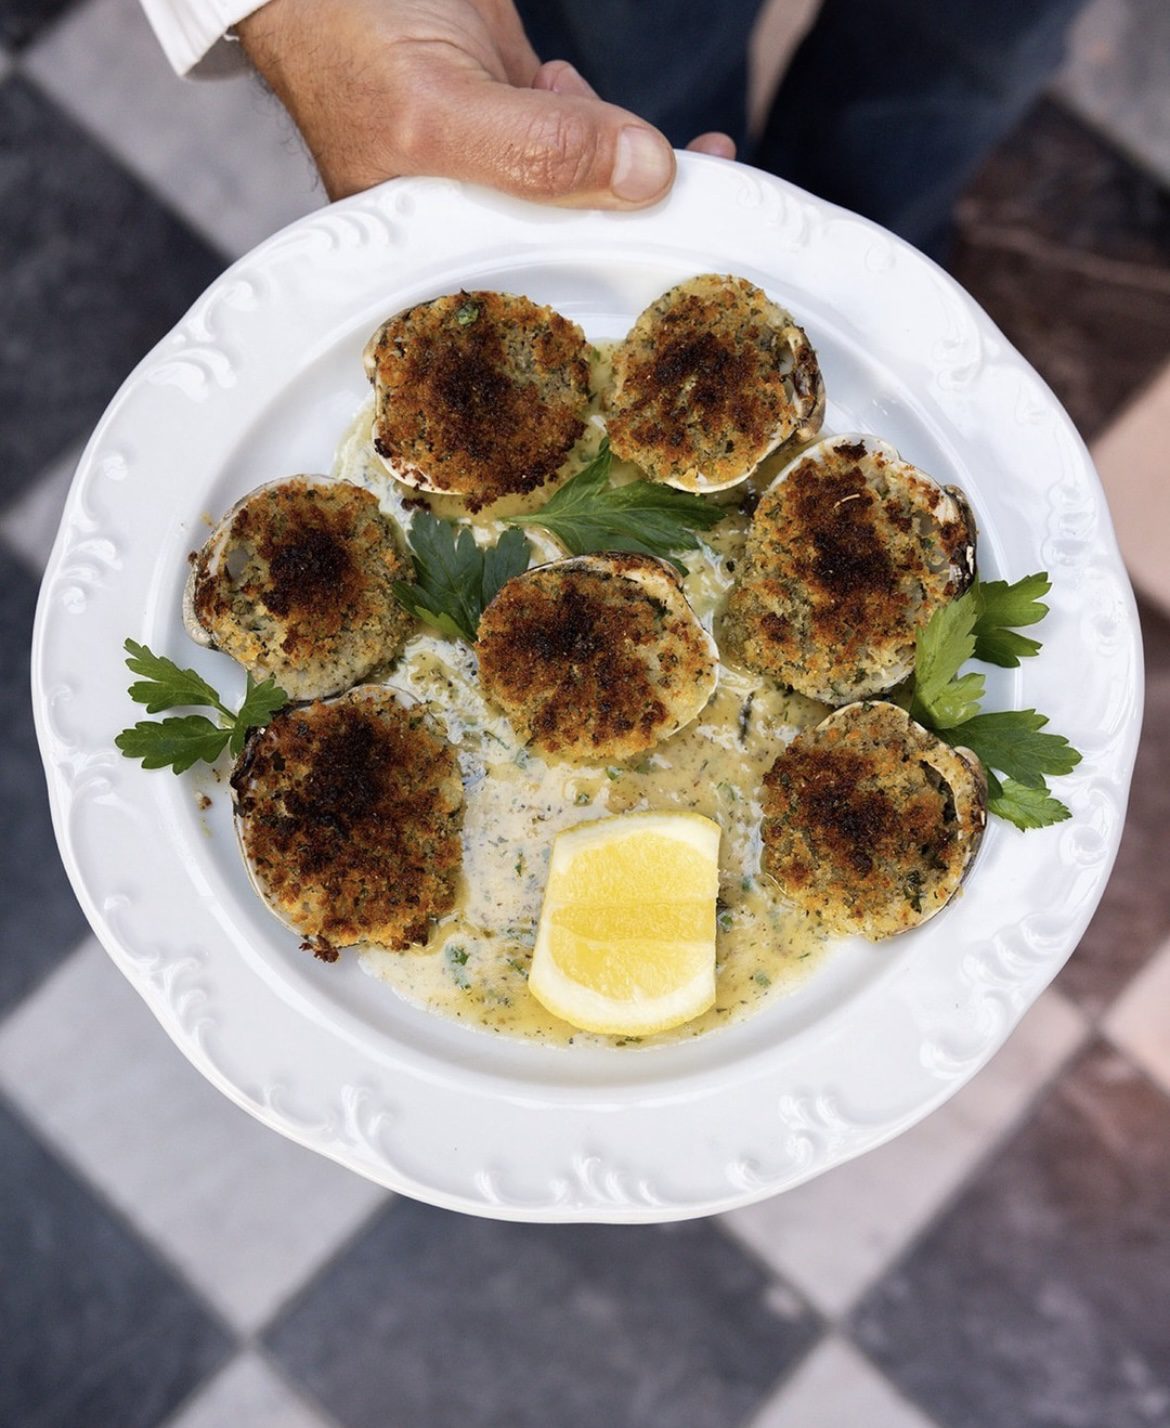 one of the Things Making Me Happy: 8.15.22 is this baked clams and lemon